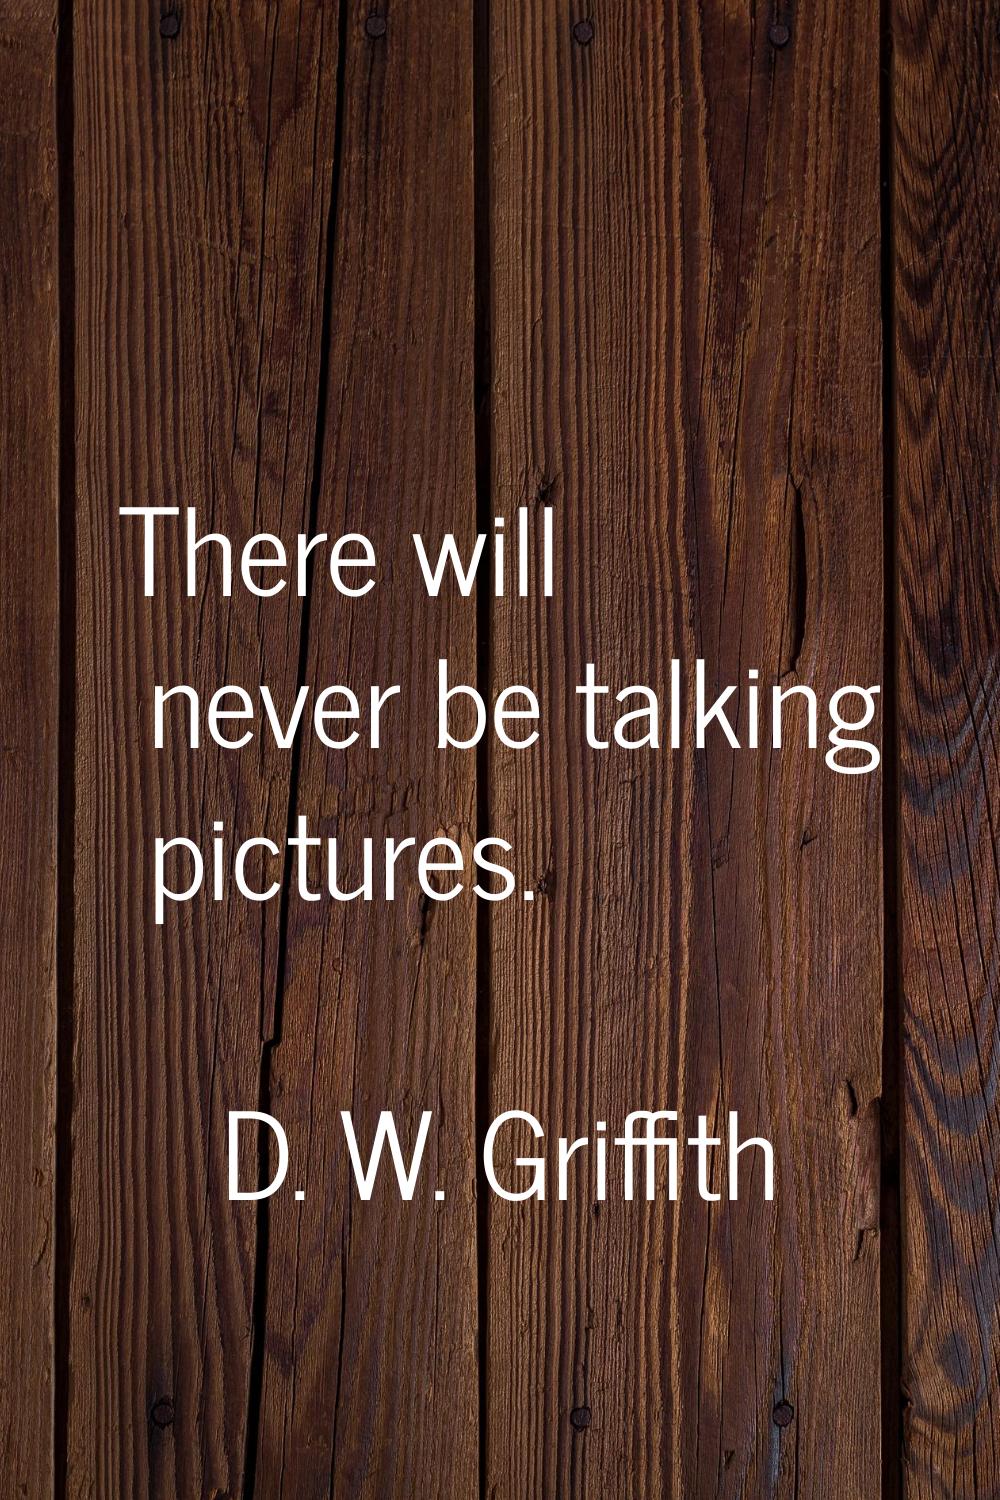 There will never be talking pictures.